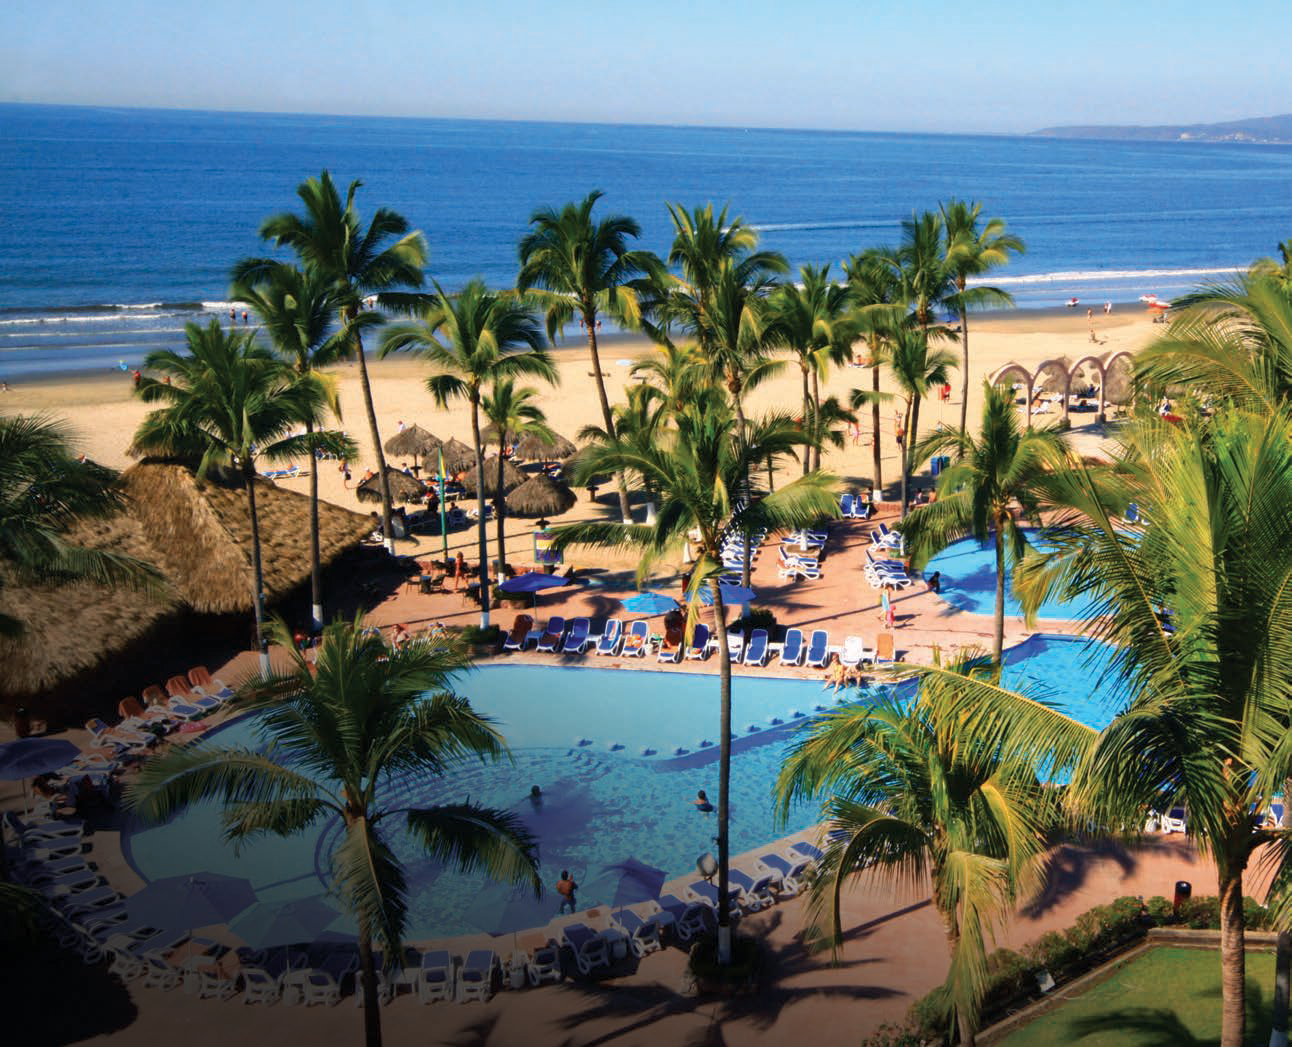 The 274-room Occidental Grand Nuevo Vallarta is located on Bahía de Banderas, a beautiful stretch of sand on the Pacific coast.